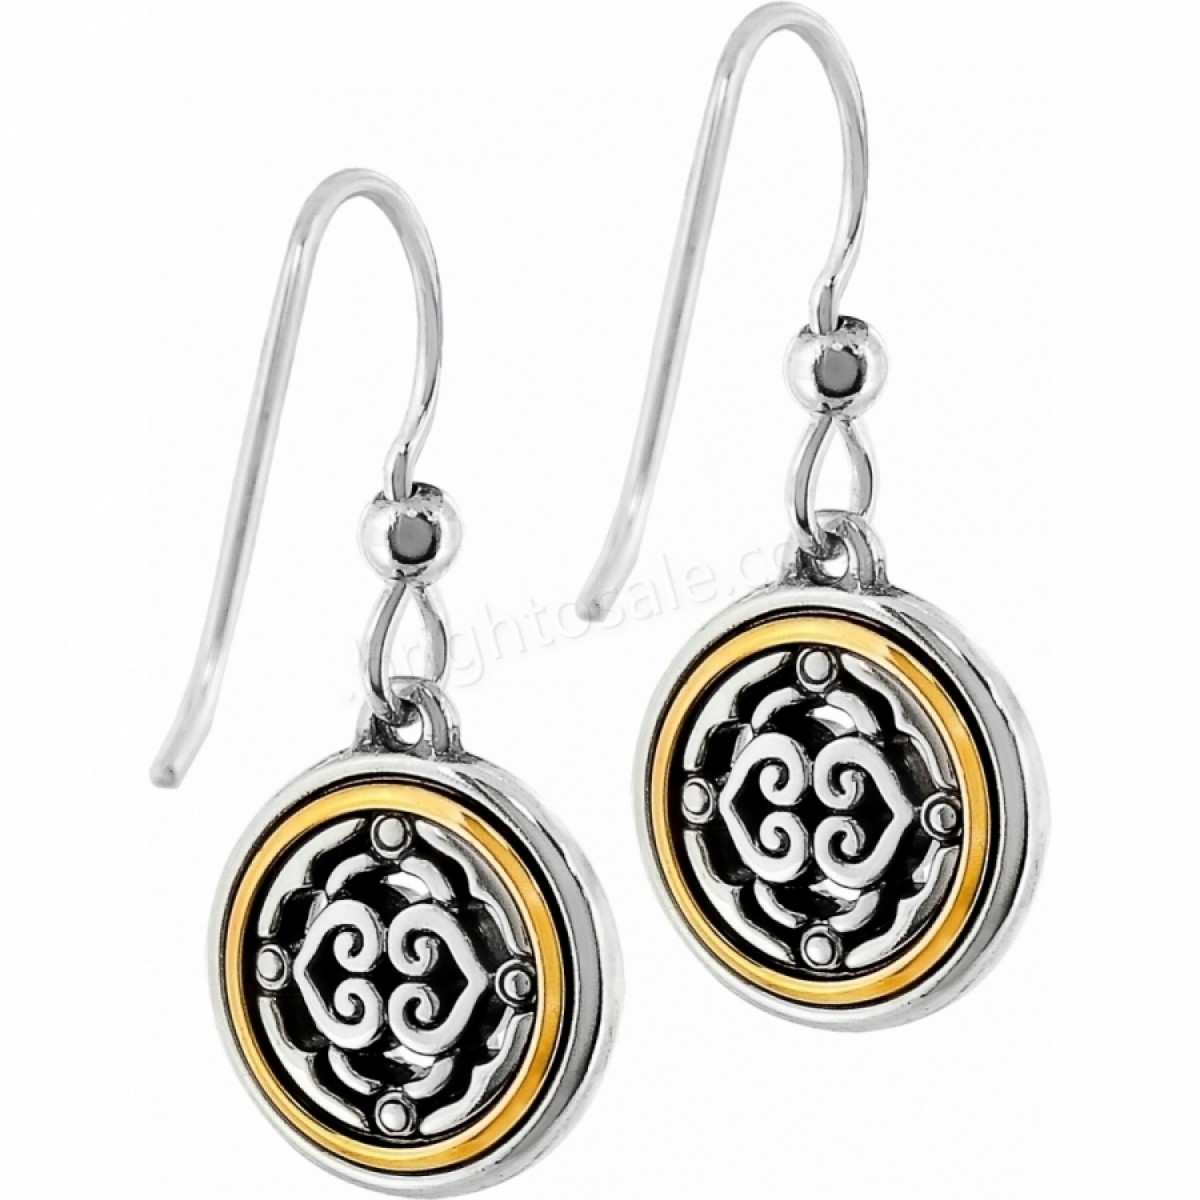 Brighton Collectibles & Online Discount Intrigue French Wire Earrings - -1